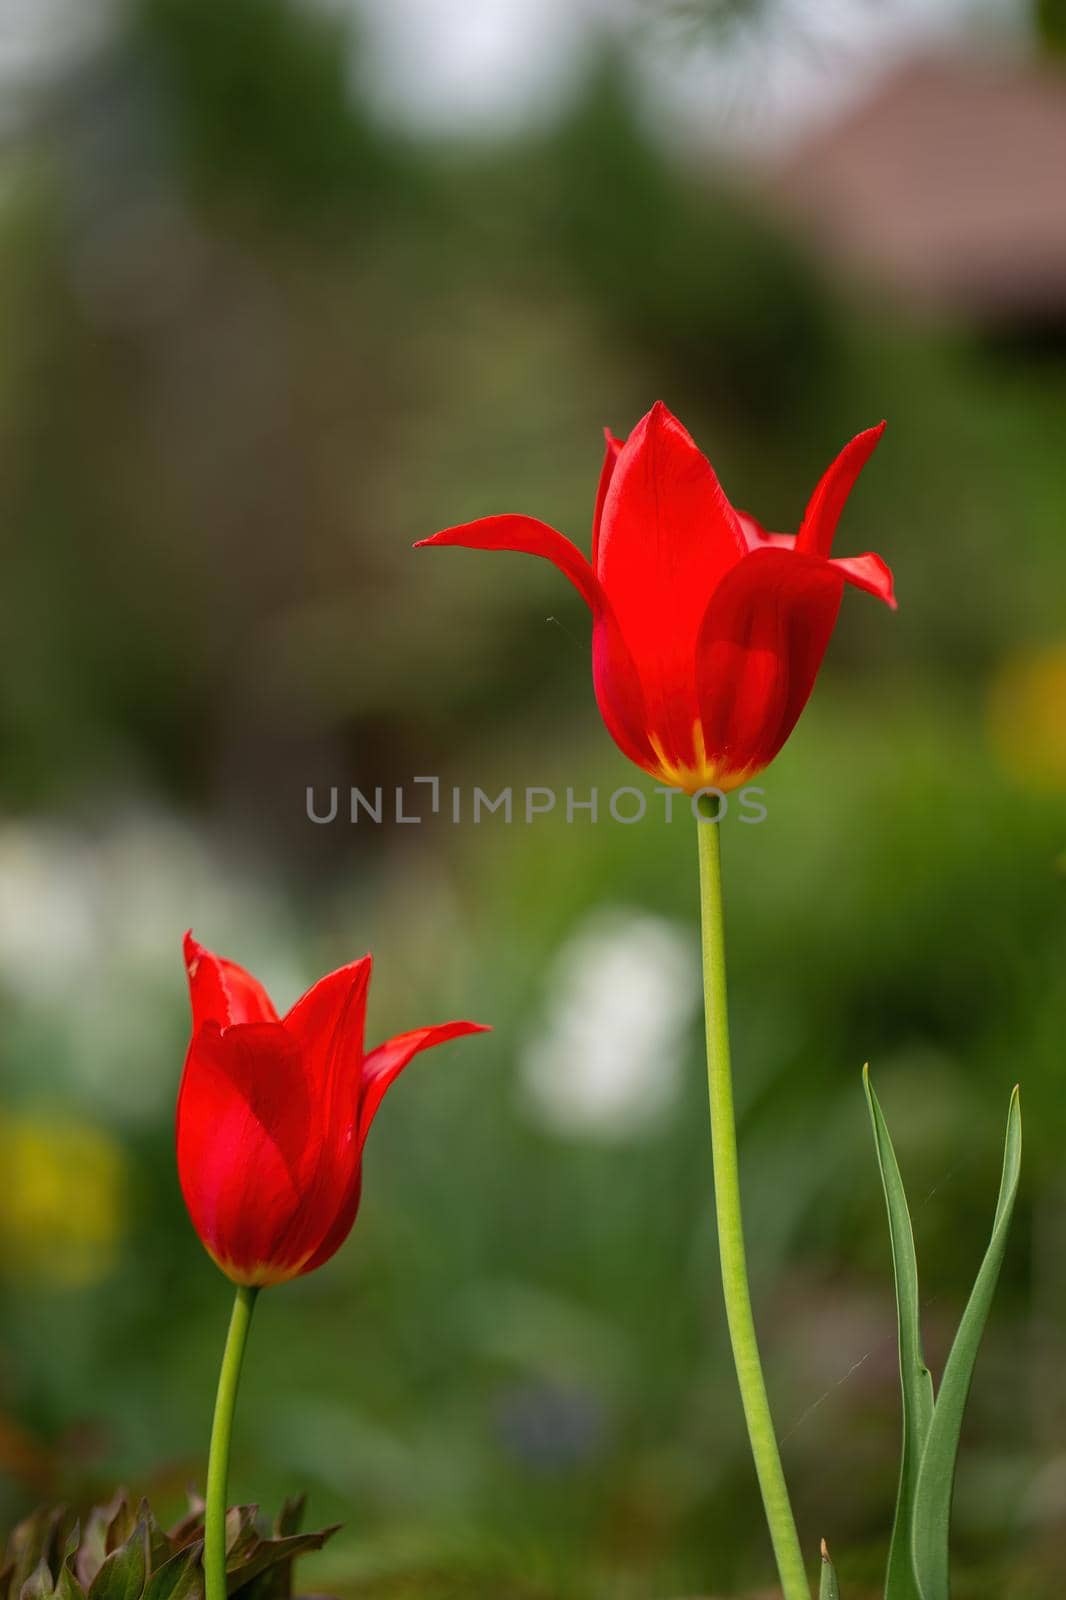 Red tulips in the garden at spring by clusterx